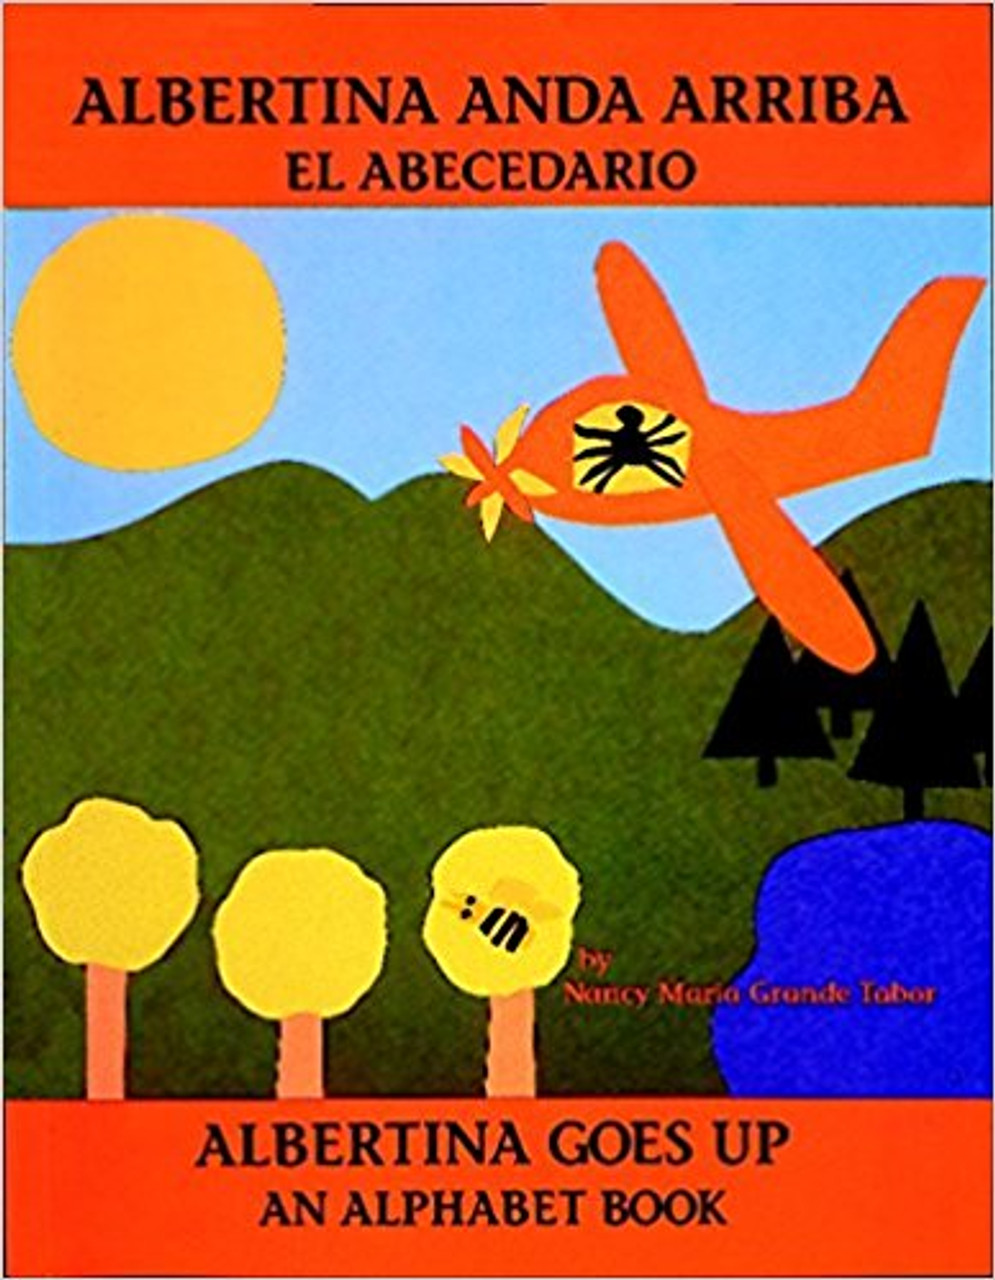 Children will learn the sounds of the Spanish alphabet while they are entertained by a wild assortment of funny animals. One letter is covered per page and every page has questions for young readers to answer as they look at the delightful cut-paper pictures. An English translation is provided alongside the Spanish text. Full-color illustrations.